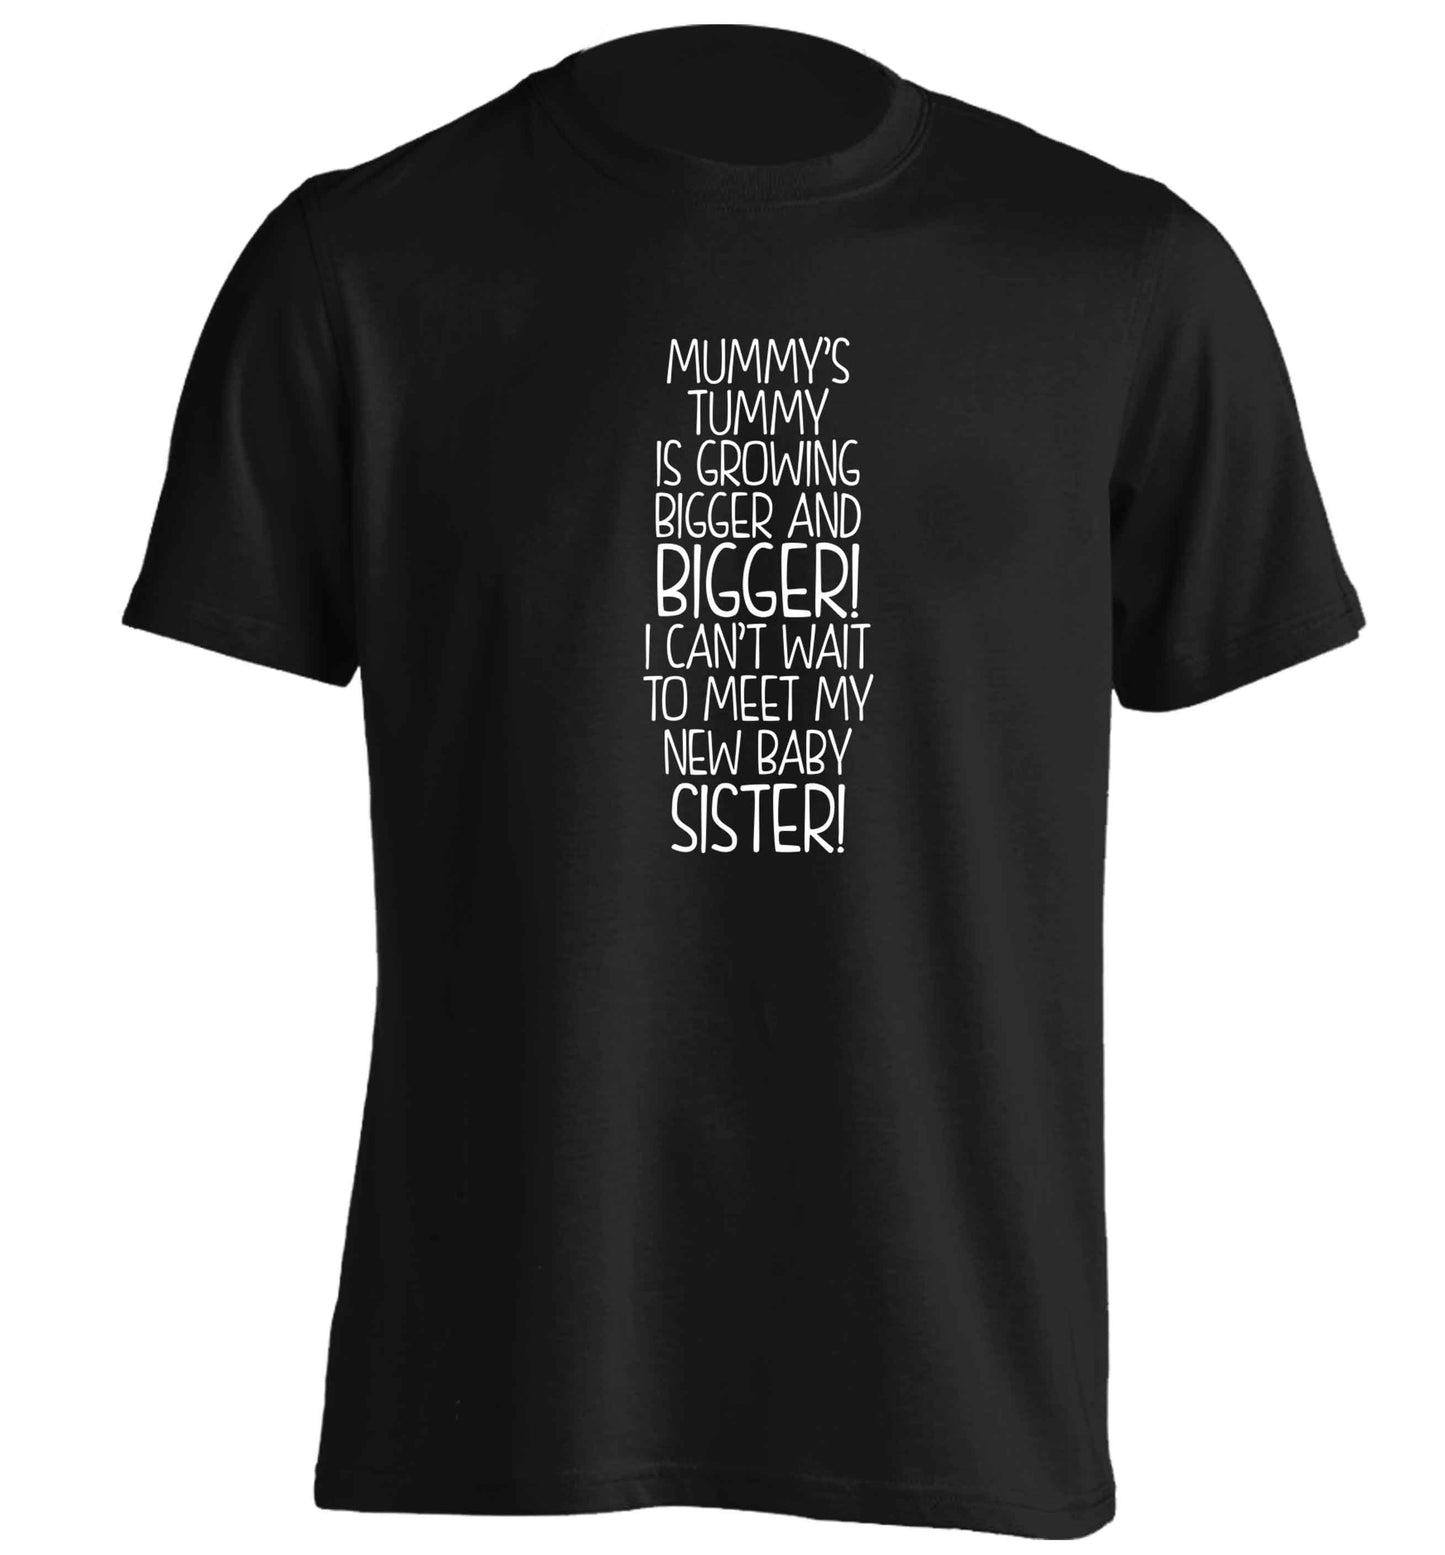 Mummy's tummy is growing bigger and bigger I can't wait to meet my new baby sister! adults unisex black Tshirt 2XL